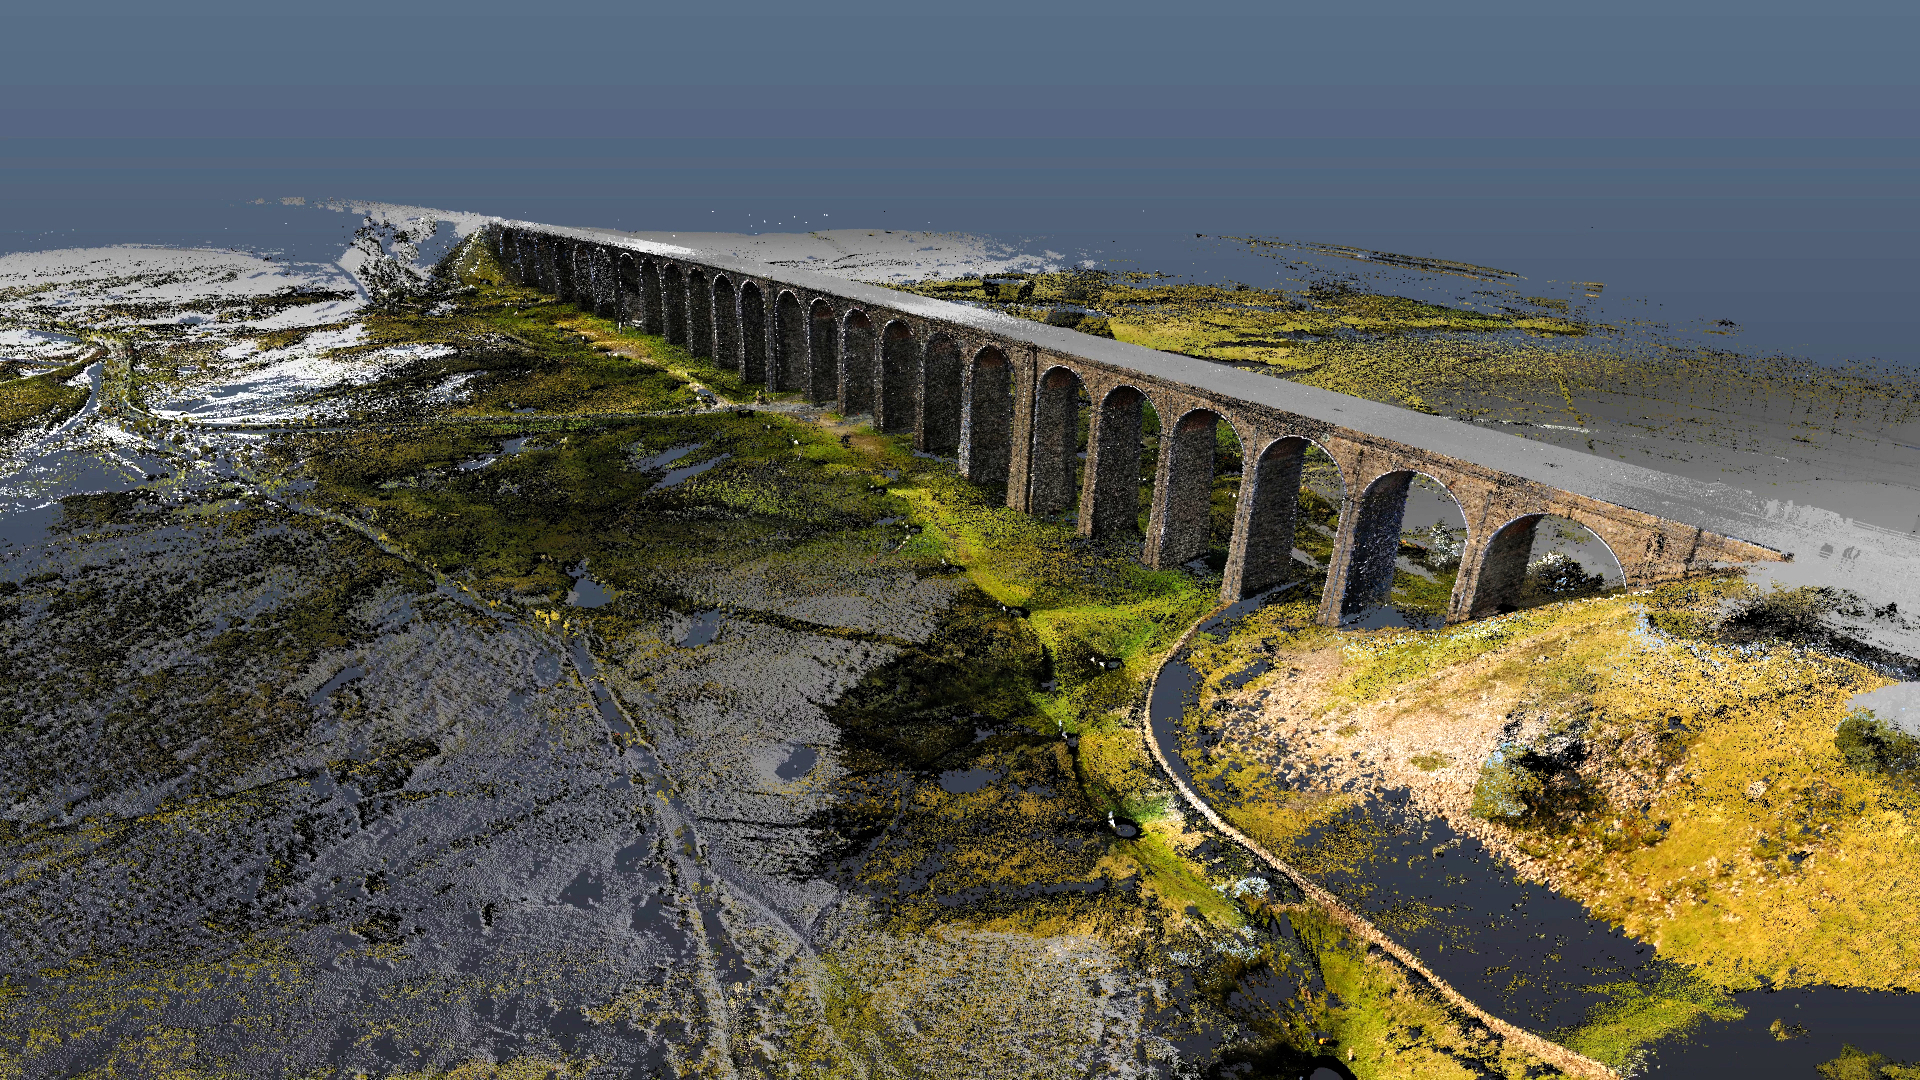 And finally… Viaduct recreated with laser and drone technology